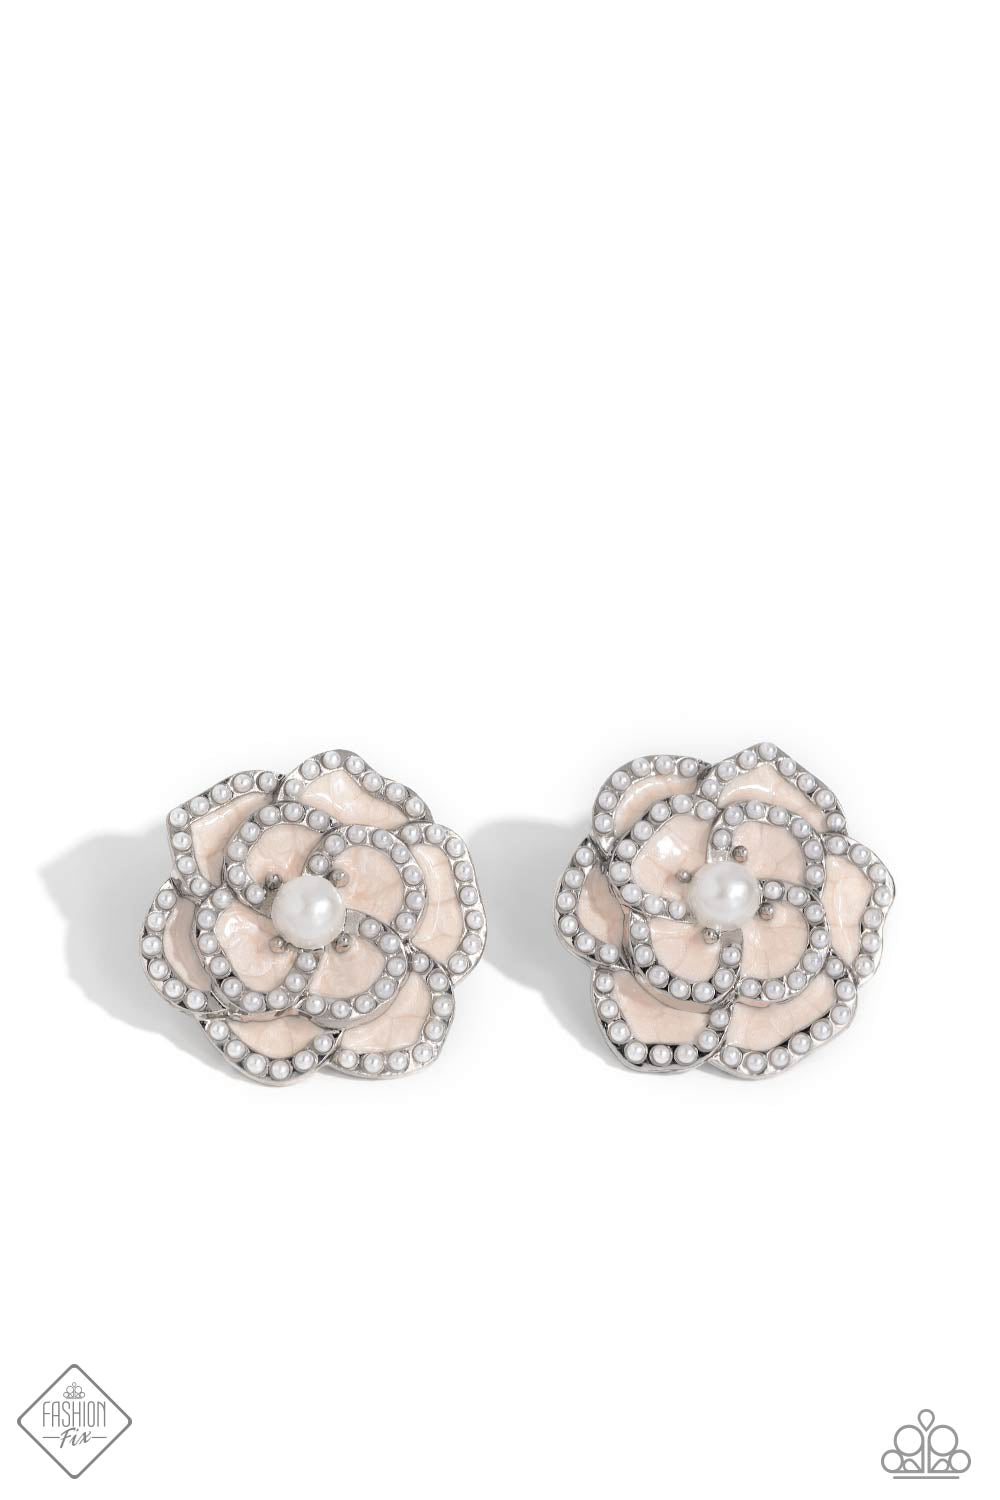 Suave Sensation - White Pearl Earrings - Paparazzi Accessories - Layers of Tender Peach pearl-painted, heart-shaped petals curve around a white pearl center, creating an airy three-dimensional flower. Dainty white pearls dot along each curved petal adding refinement to the whimsical frame. Earring attaches to a standard post fitting. Sold as one pair of post earrings.